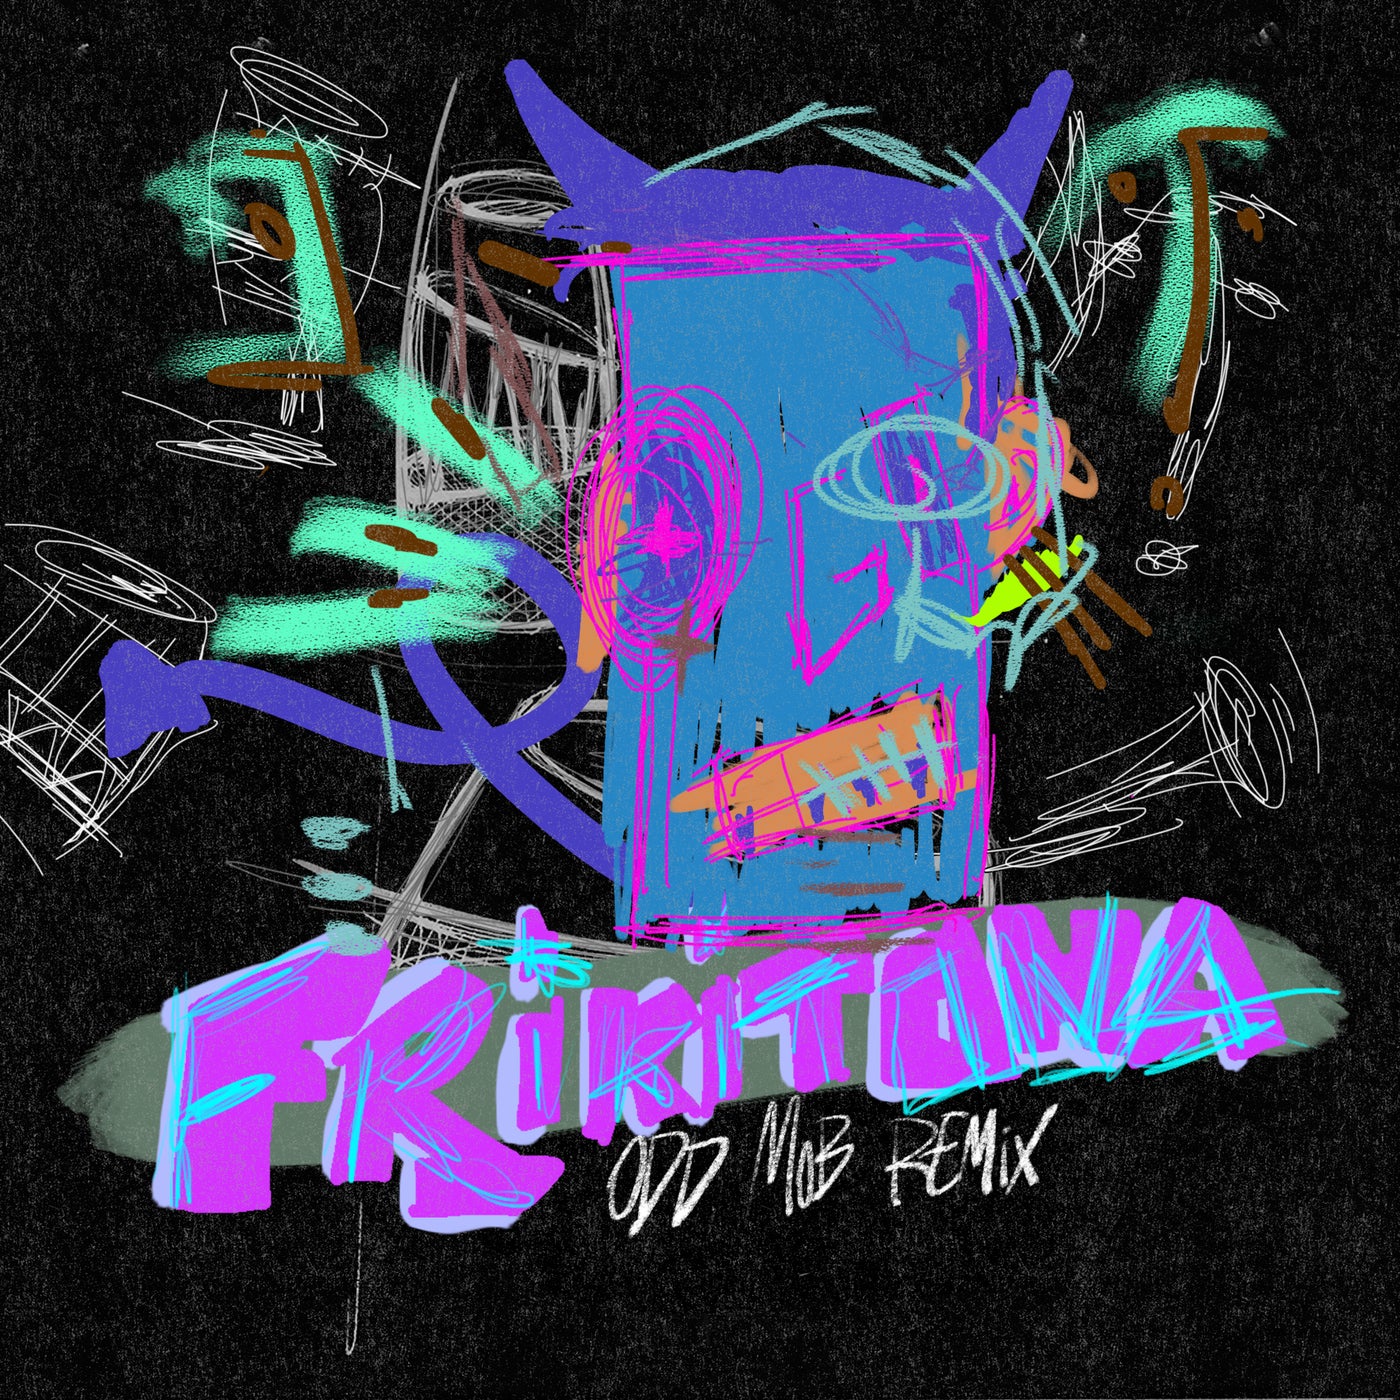 Release Cover: Frikitona (Odd Mob Extended Remix) Download Free on Electrobuzz